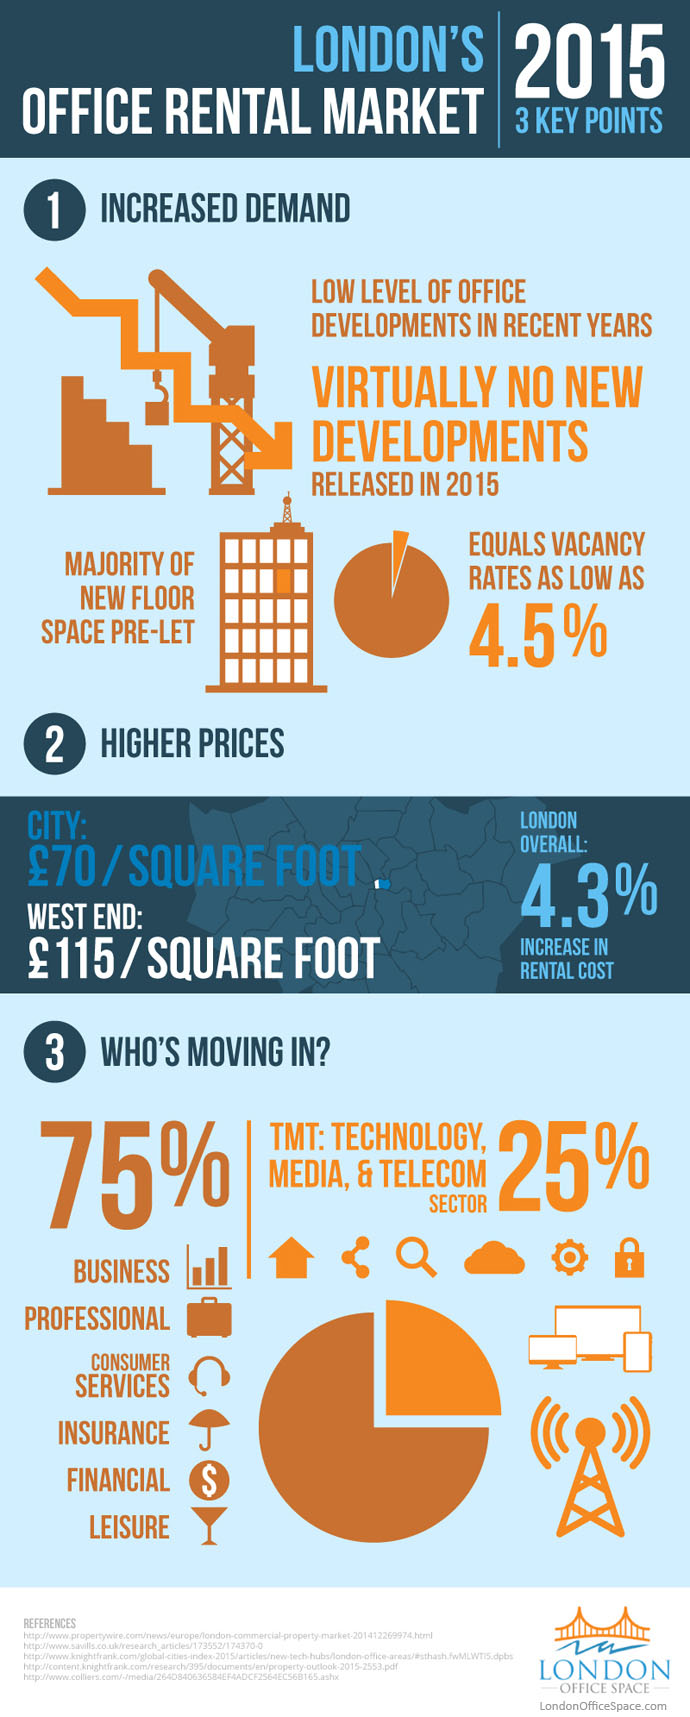 infographic showing increased demand and higher prices in the 2015 London office rental market